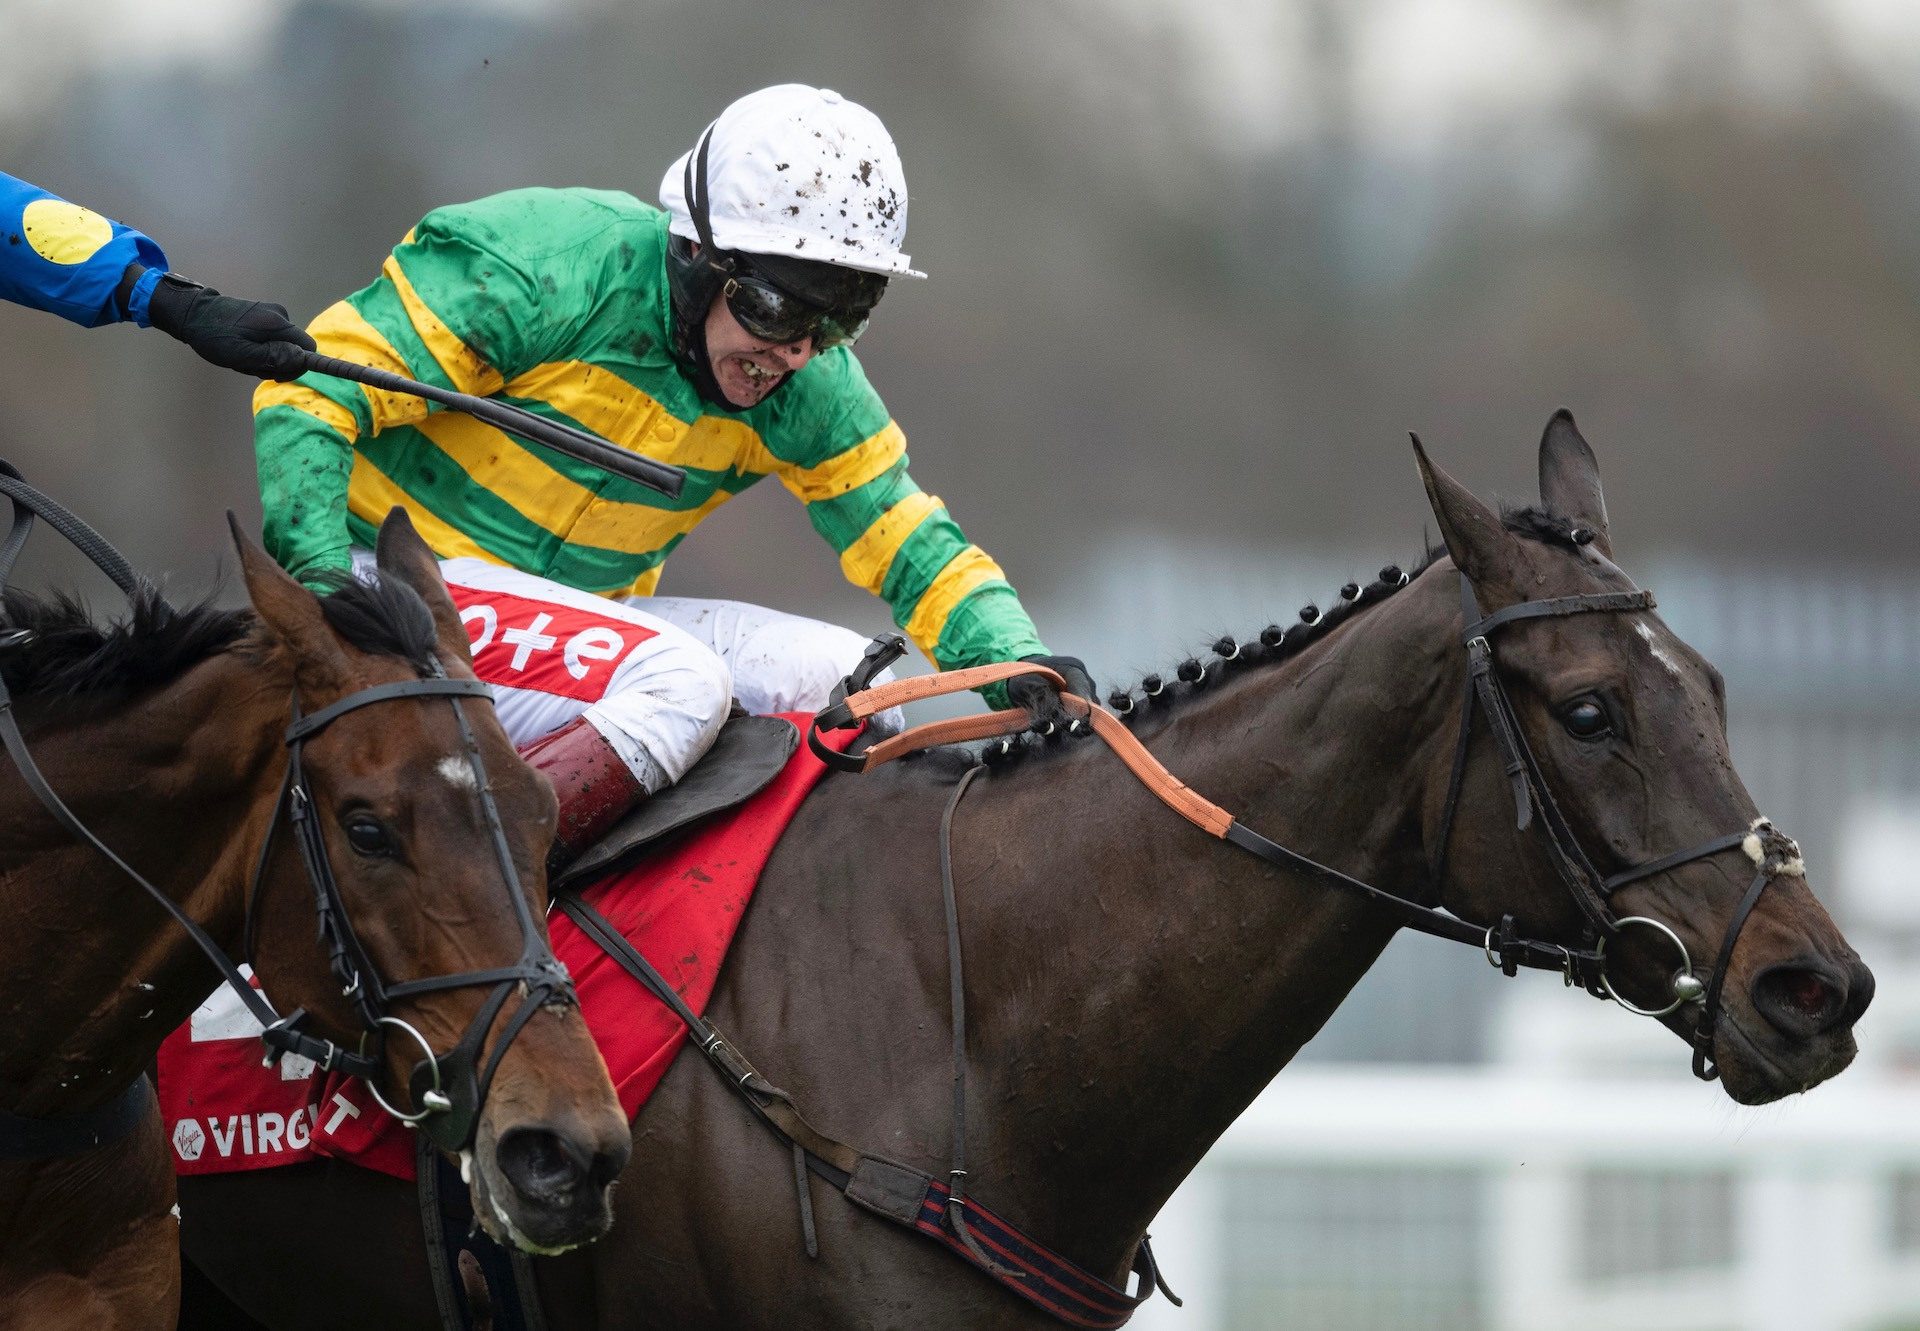 Sporting John (Getaway) Wins The Grade 1 Scilly Isles Novices Chase at Sandown